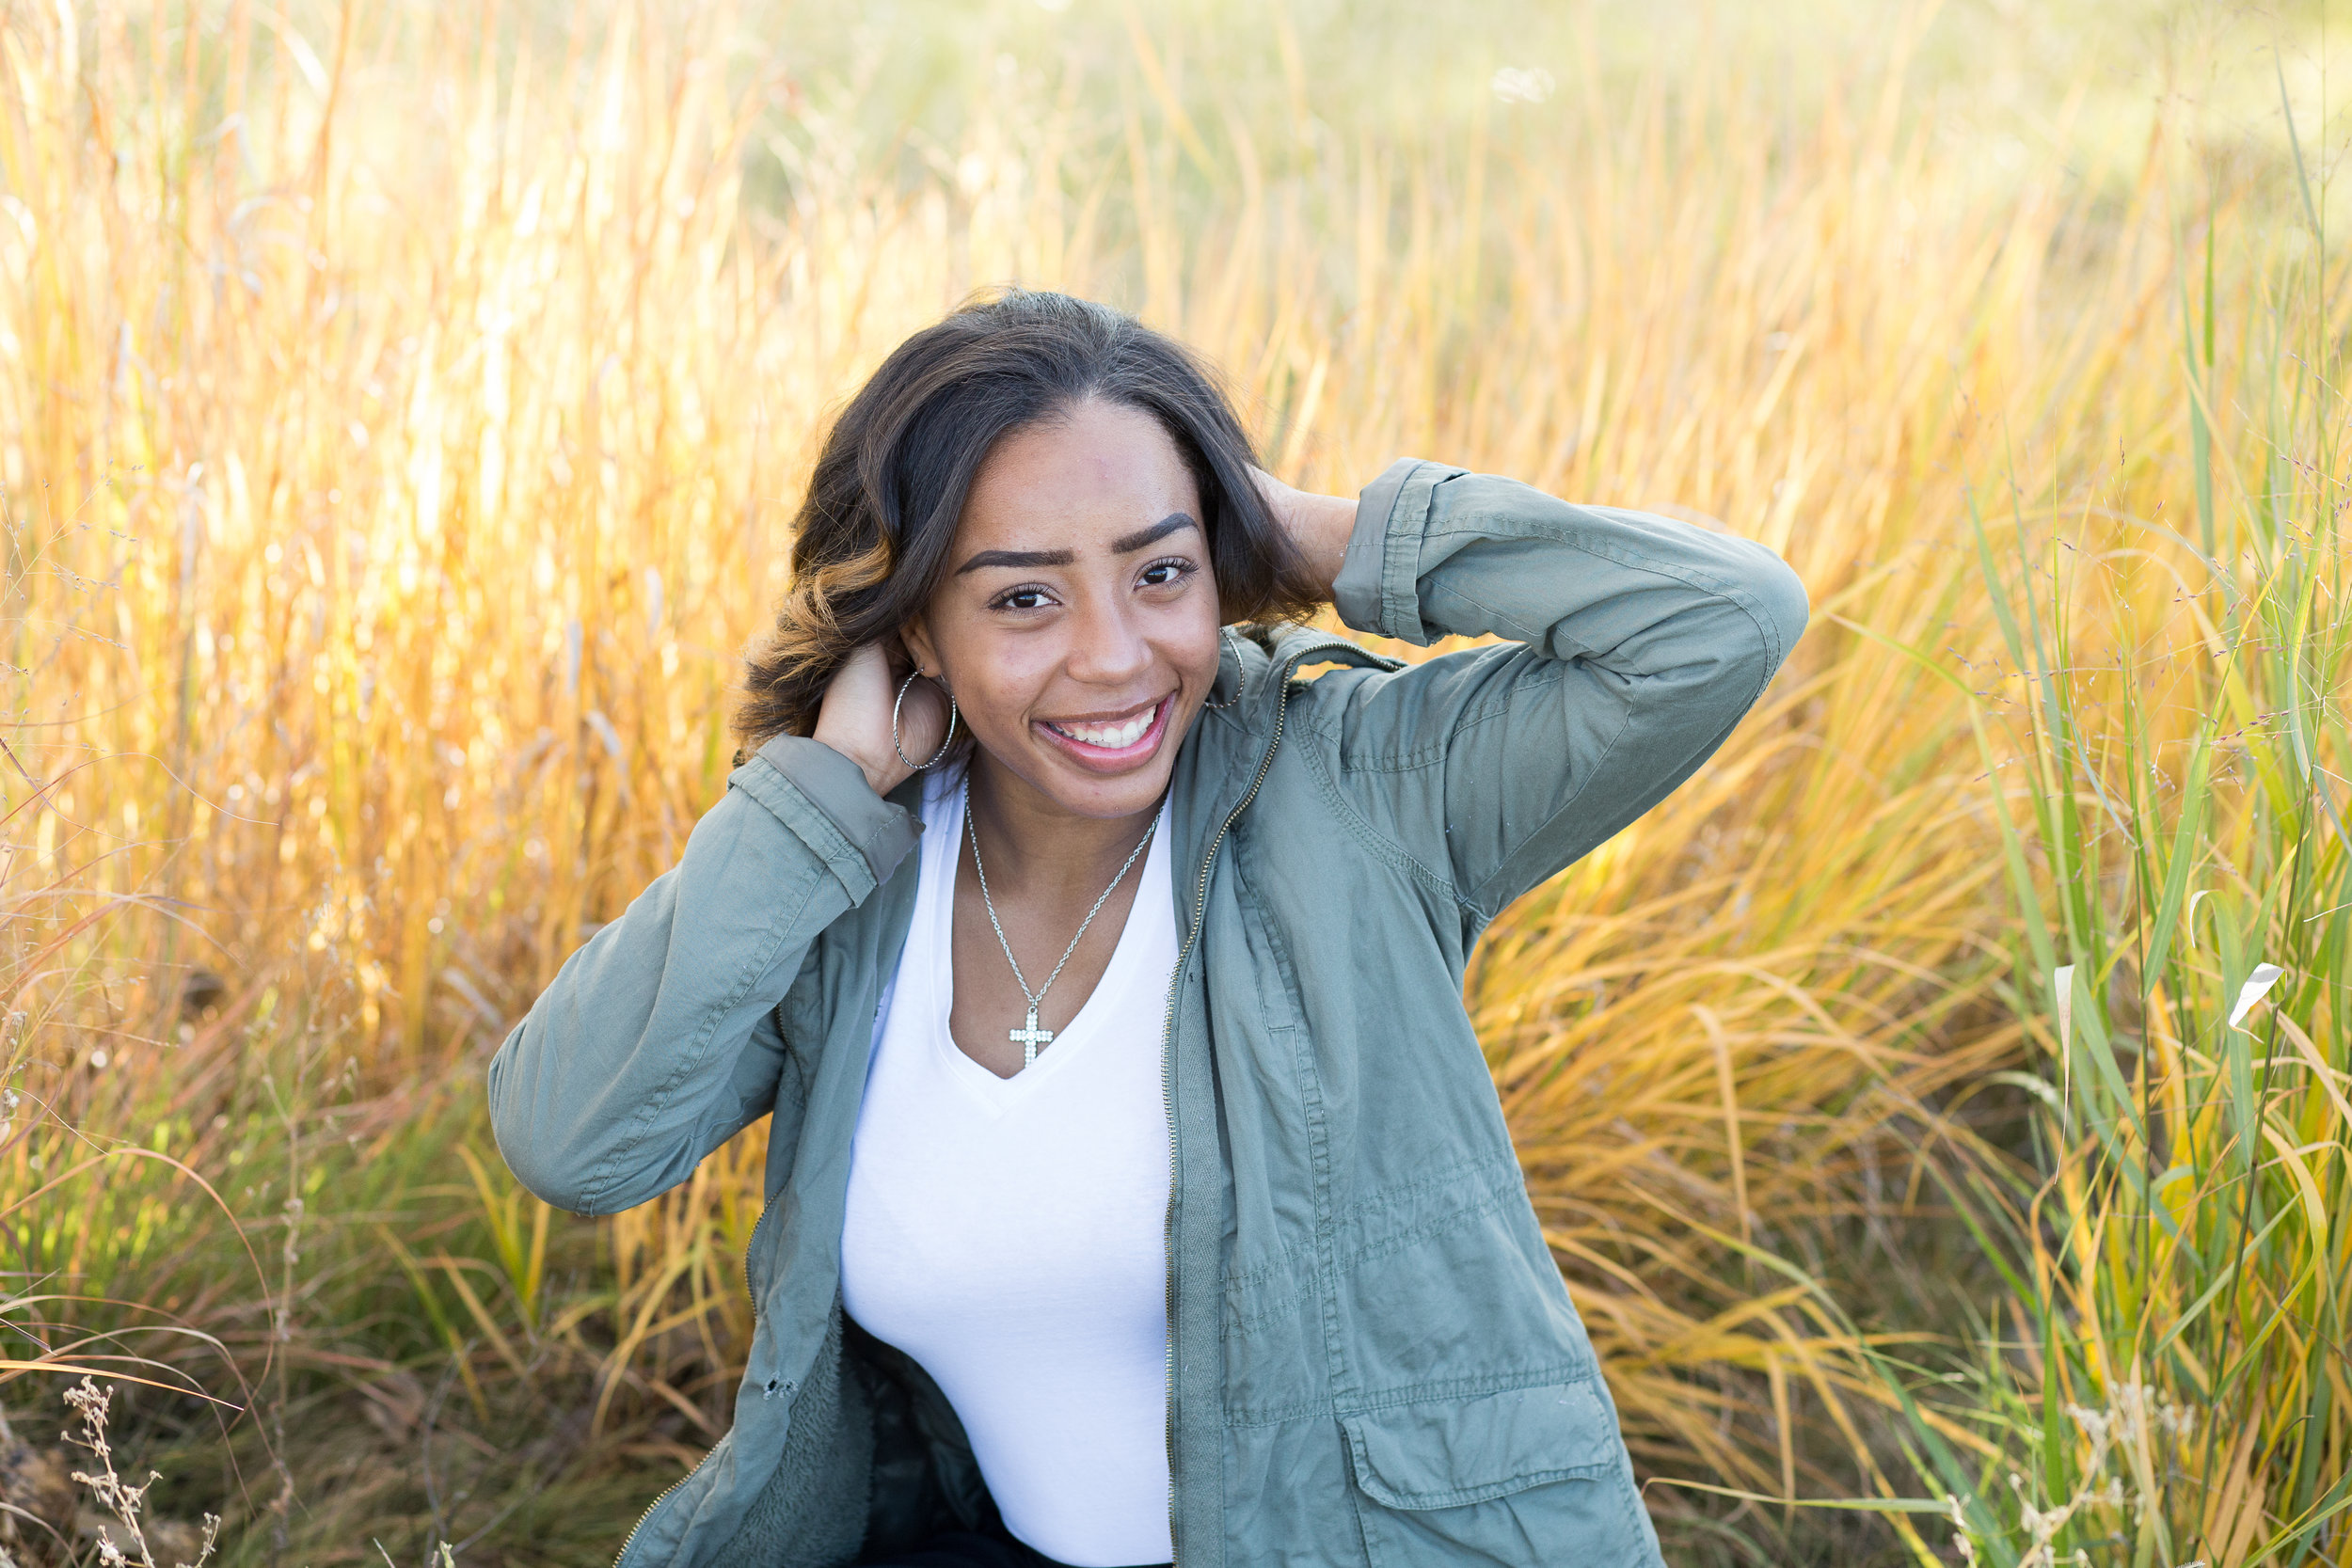 Senior girl sitting in the tall grasses smiling at camera for her senior session at Fountain  Creek Regional Park Stacy Carosa Photography Colorado Springs Senior Photographer